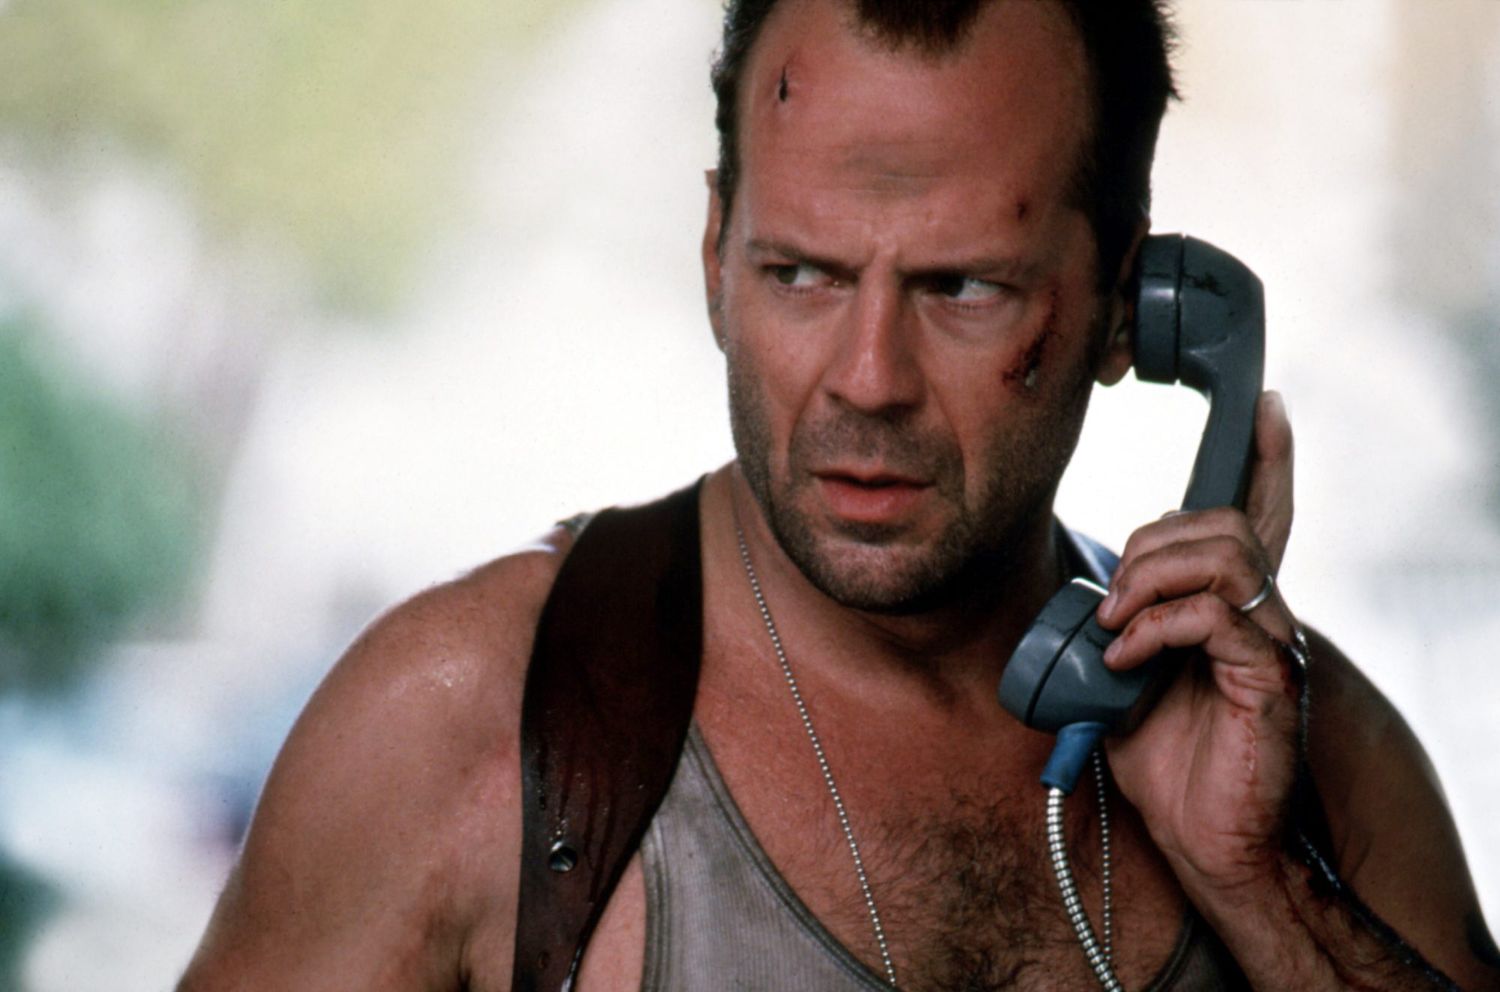 Editorial use only. No book cover usage. Mandatory Credit: Photo by Moviestore/Shutterstock (1540335a) Die Hard: With A Vengeance (Die Hard 3), Bruce Willis Film and Television